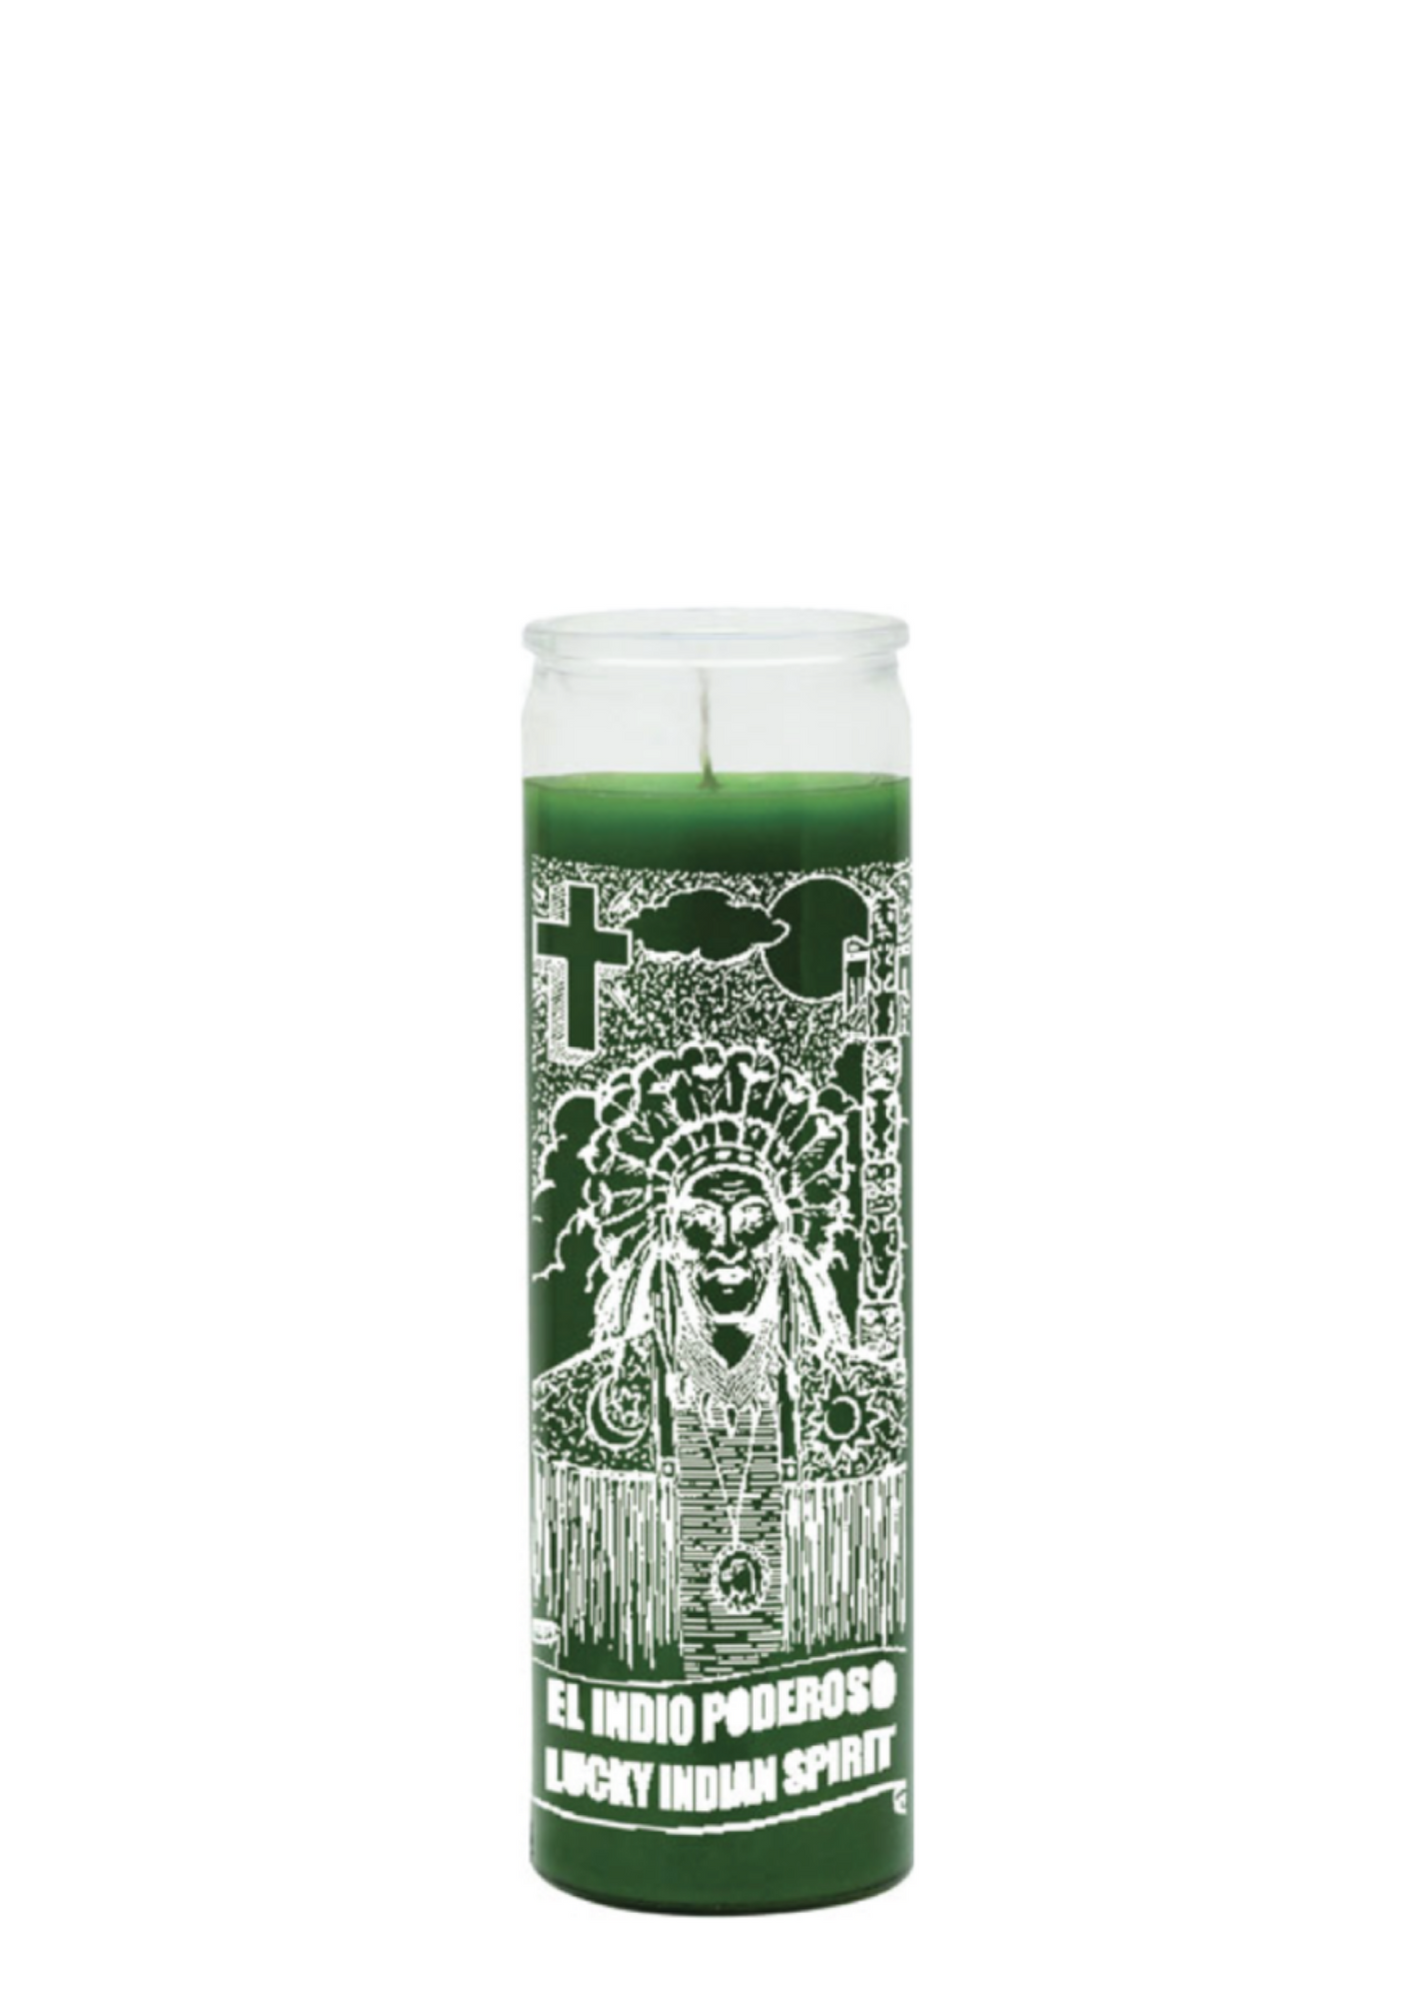 Indian spirit 1 color (green) 7 day candle